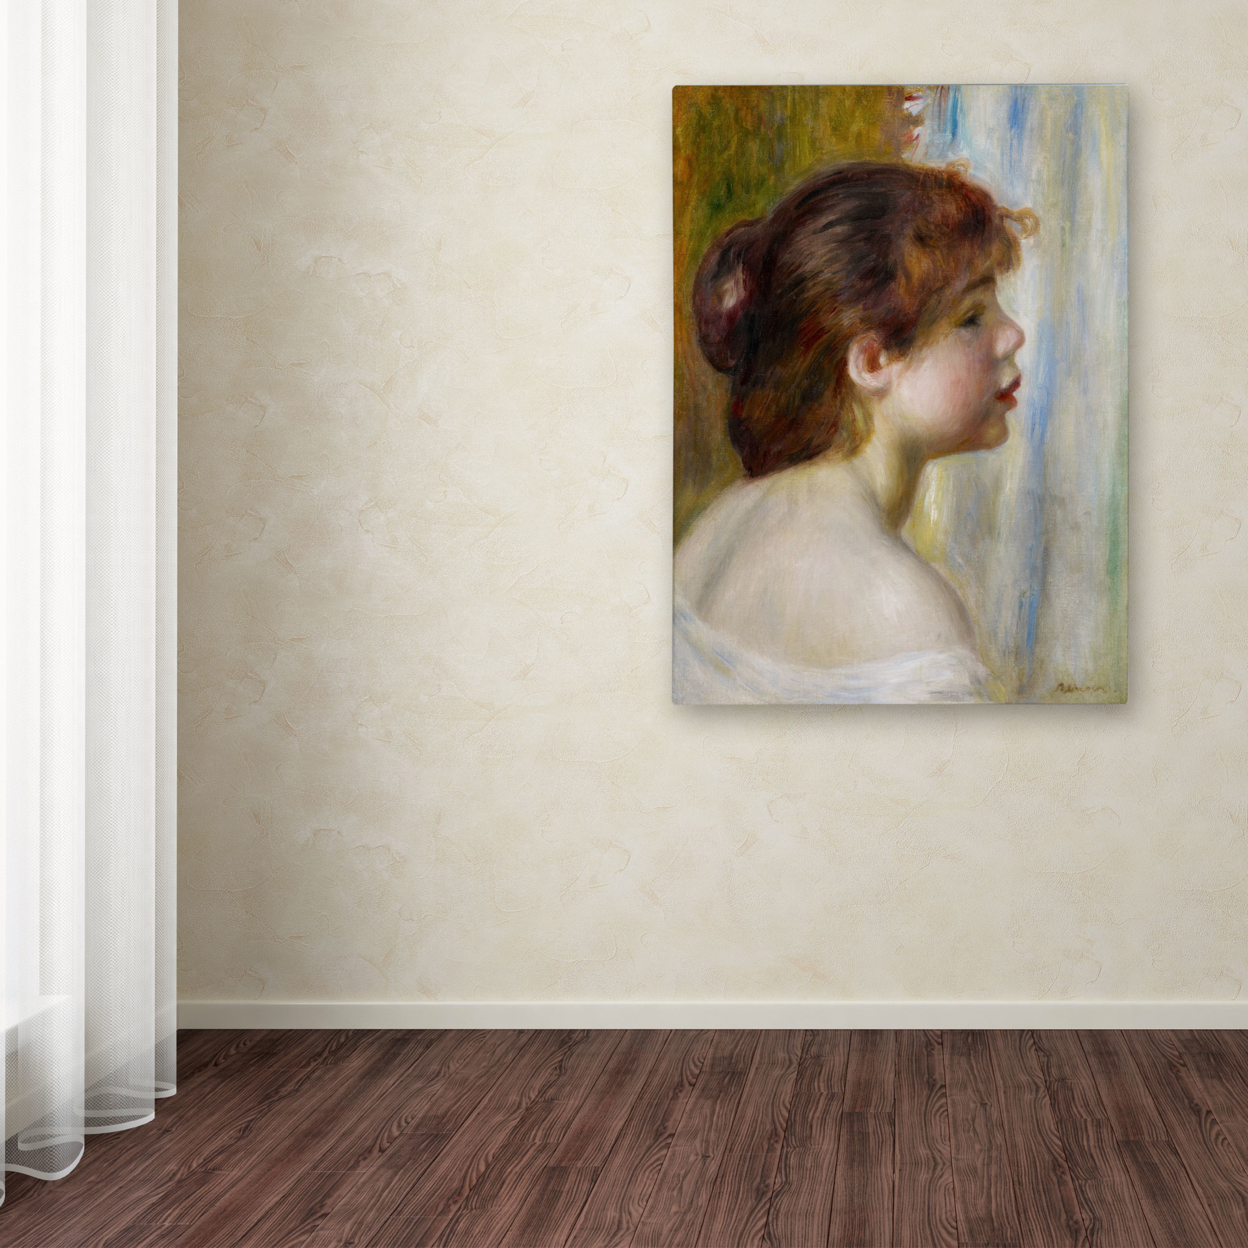 Pierre Renoir 'Head Of A Young Woman' Canvas Wall Art 35 X 47 Inches